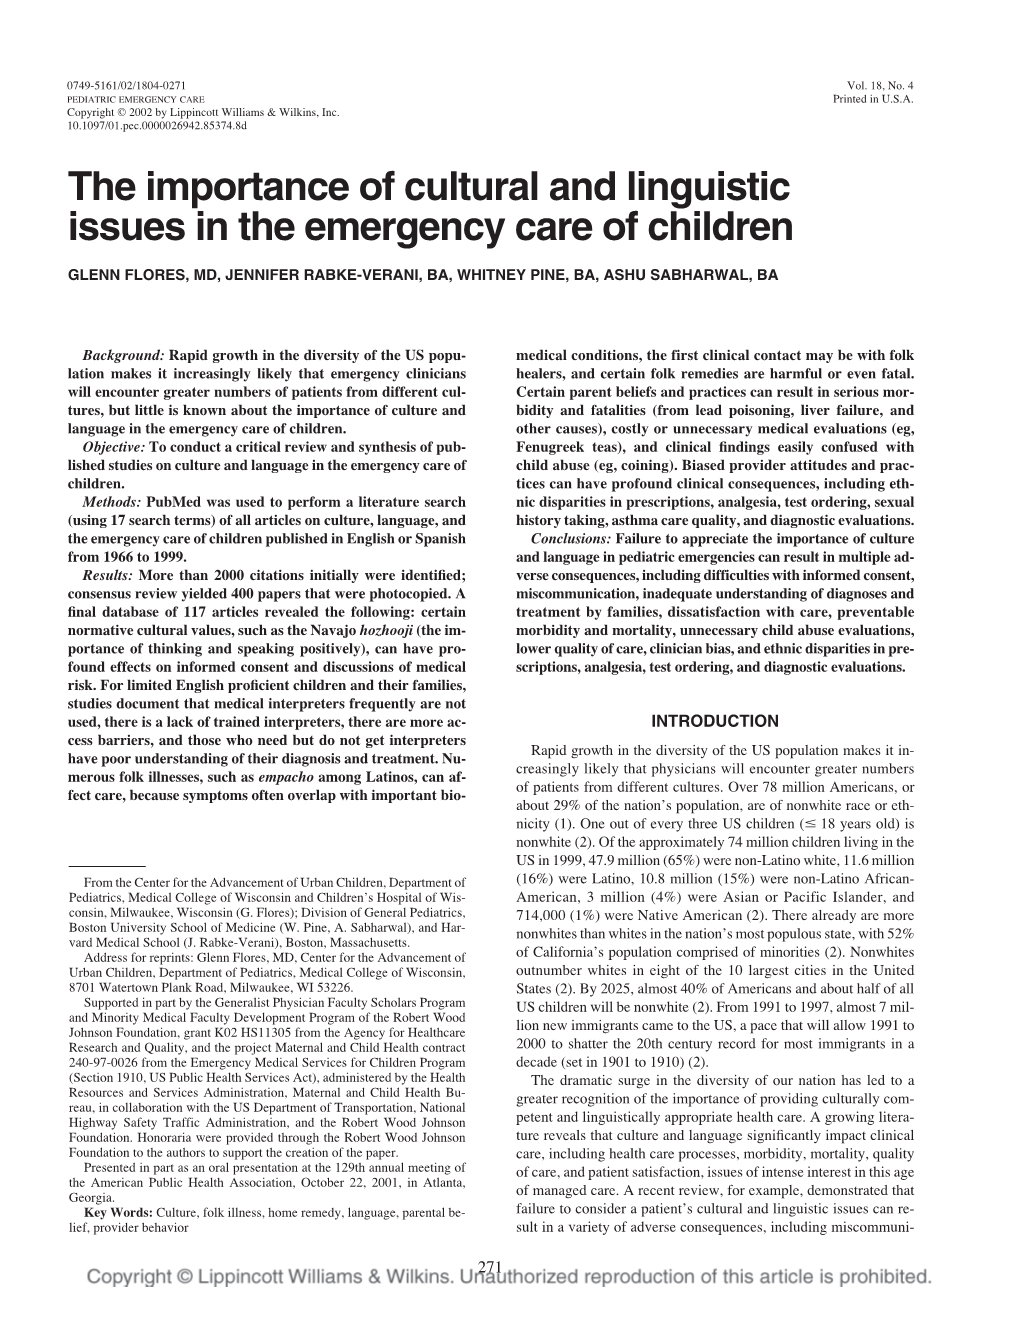 The Importance of Cultural and Linguistic Issues in the Emergency Care of Children